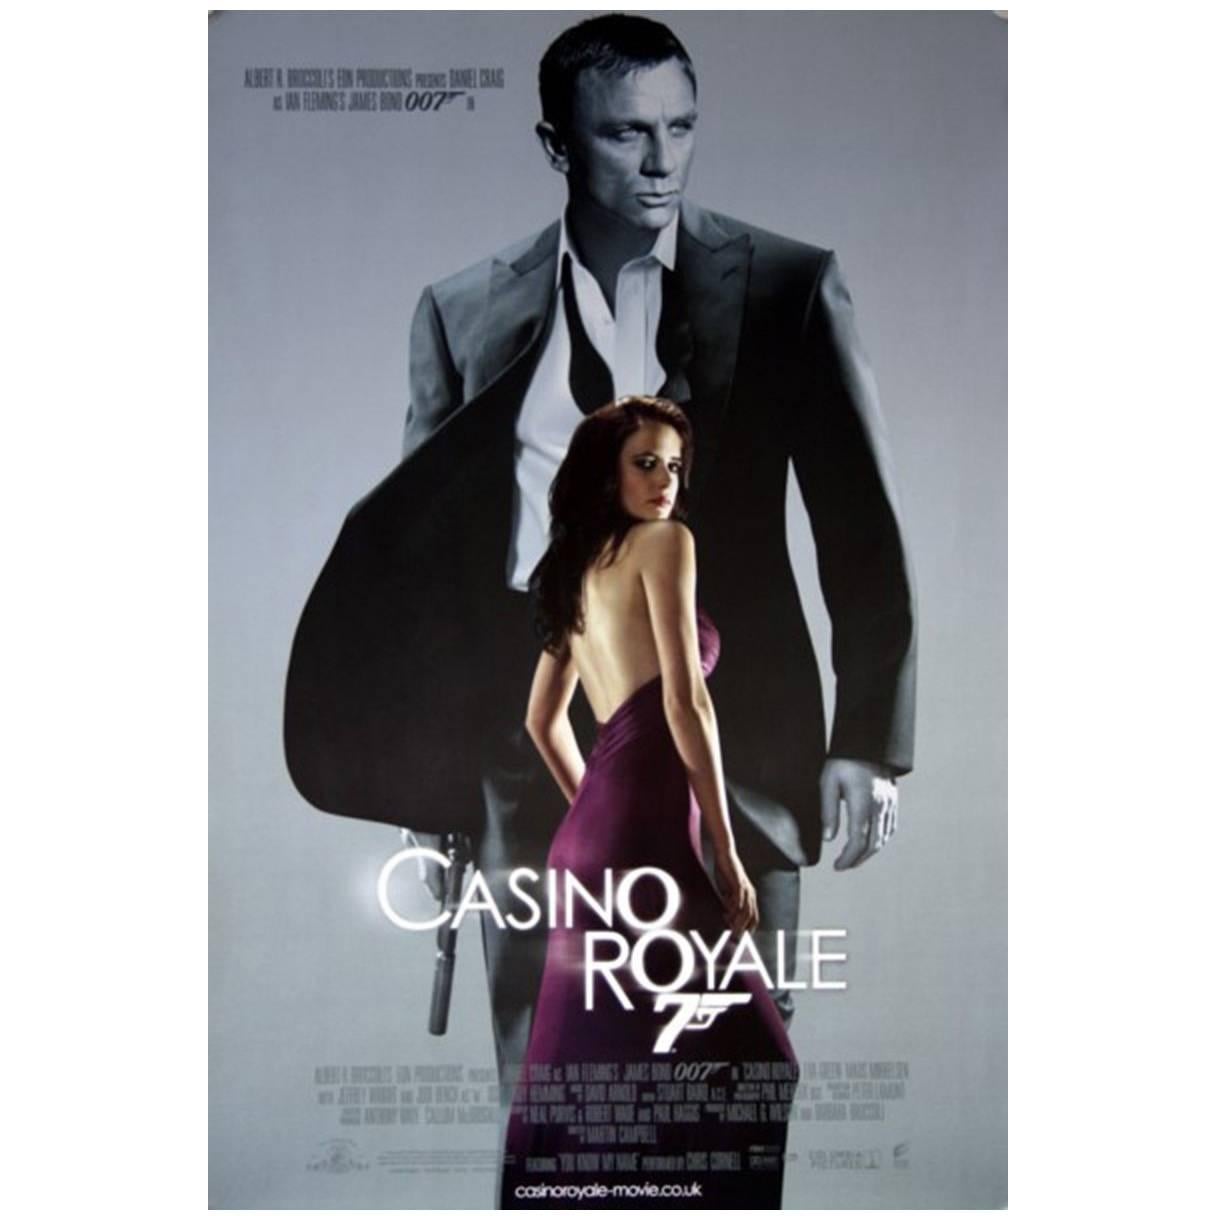 "Casino Royale", Film Poster, 2006 For Sale